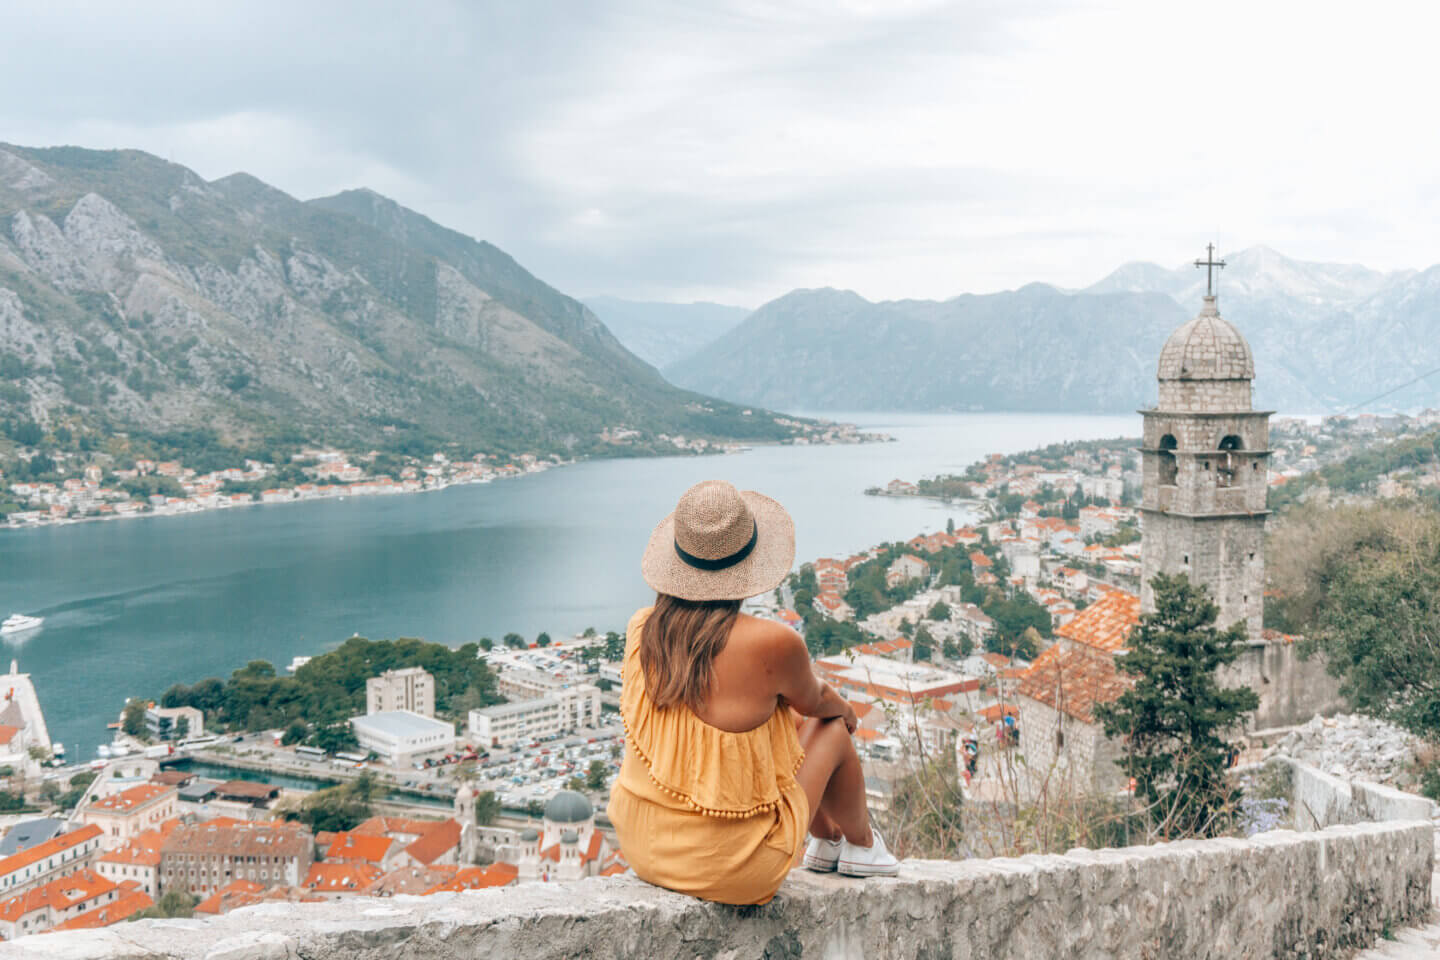 The girl with a hat on sits and admires the view of Kotor in Montenegro - one of the most romantic places in Europe for a Unique Honeymoon